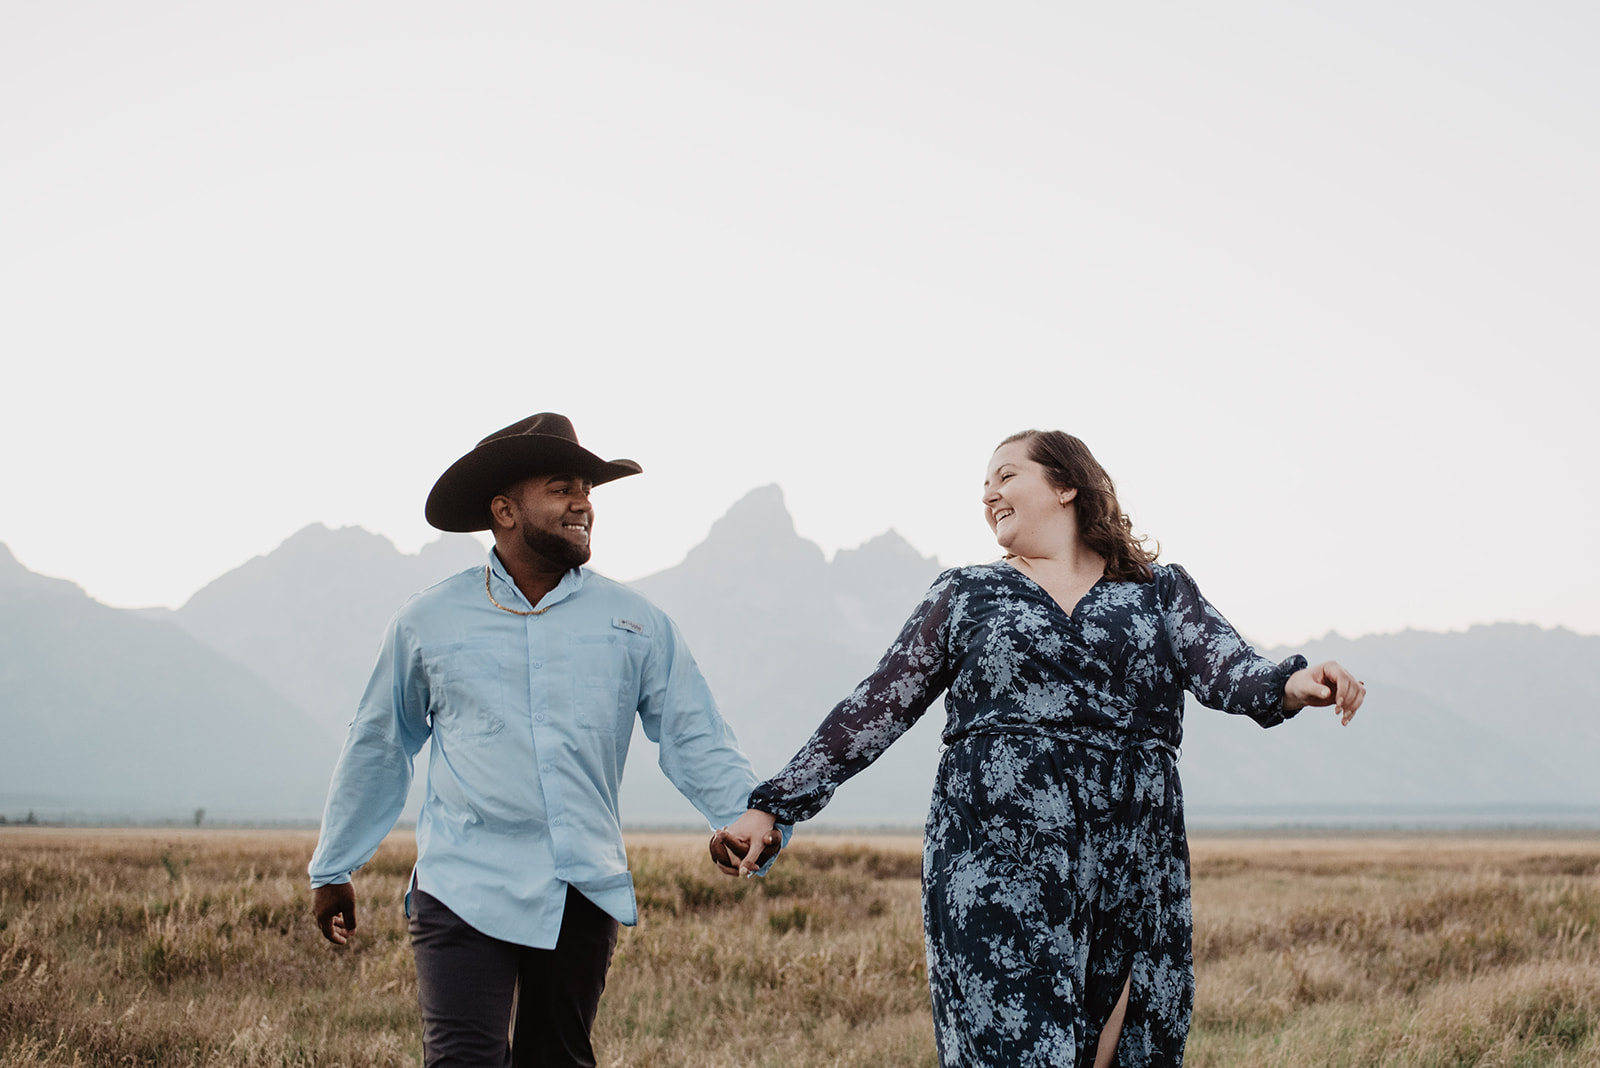 engagement photos in Jackson Hole with man and woman holding hands and running through a golden field with the Grand Tetons in the distance for an elegant western engagement photoshoot